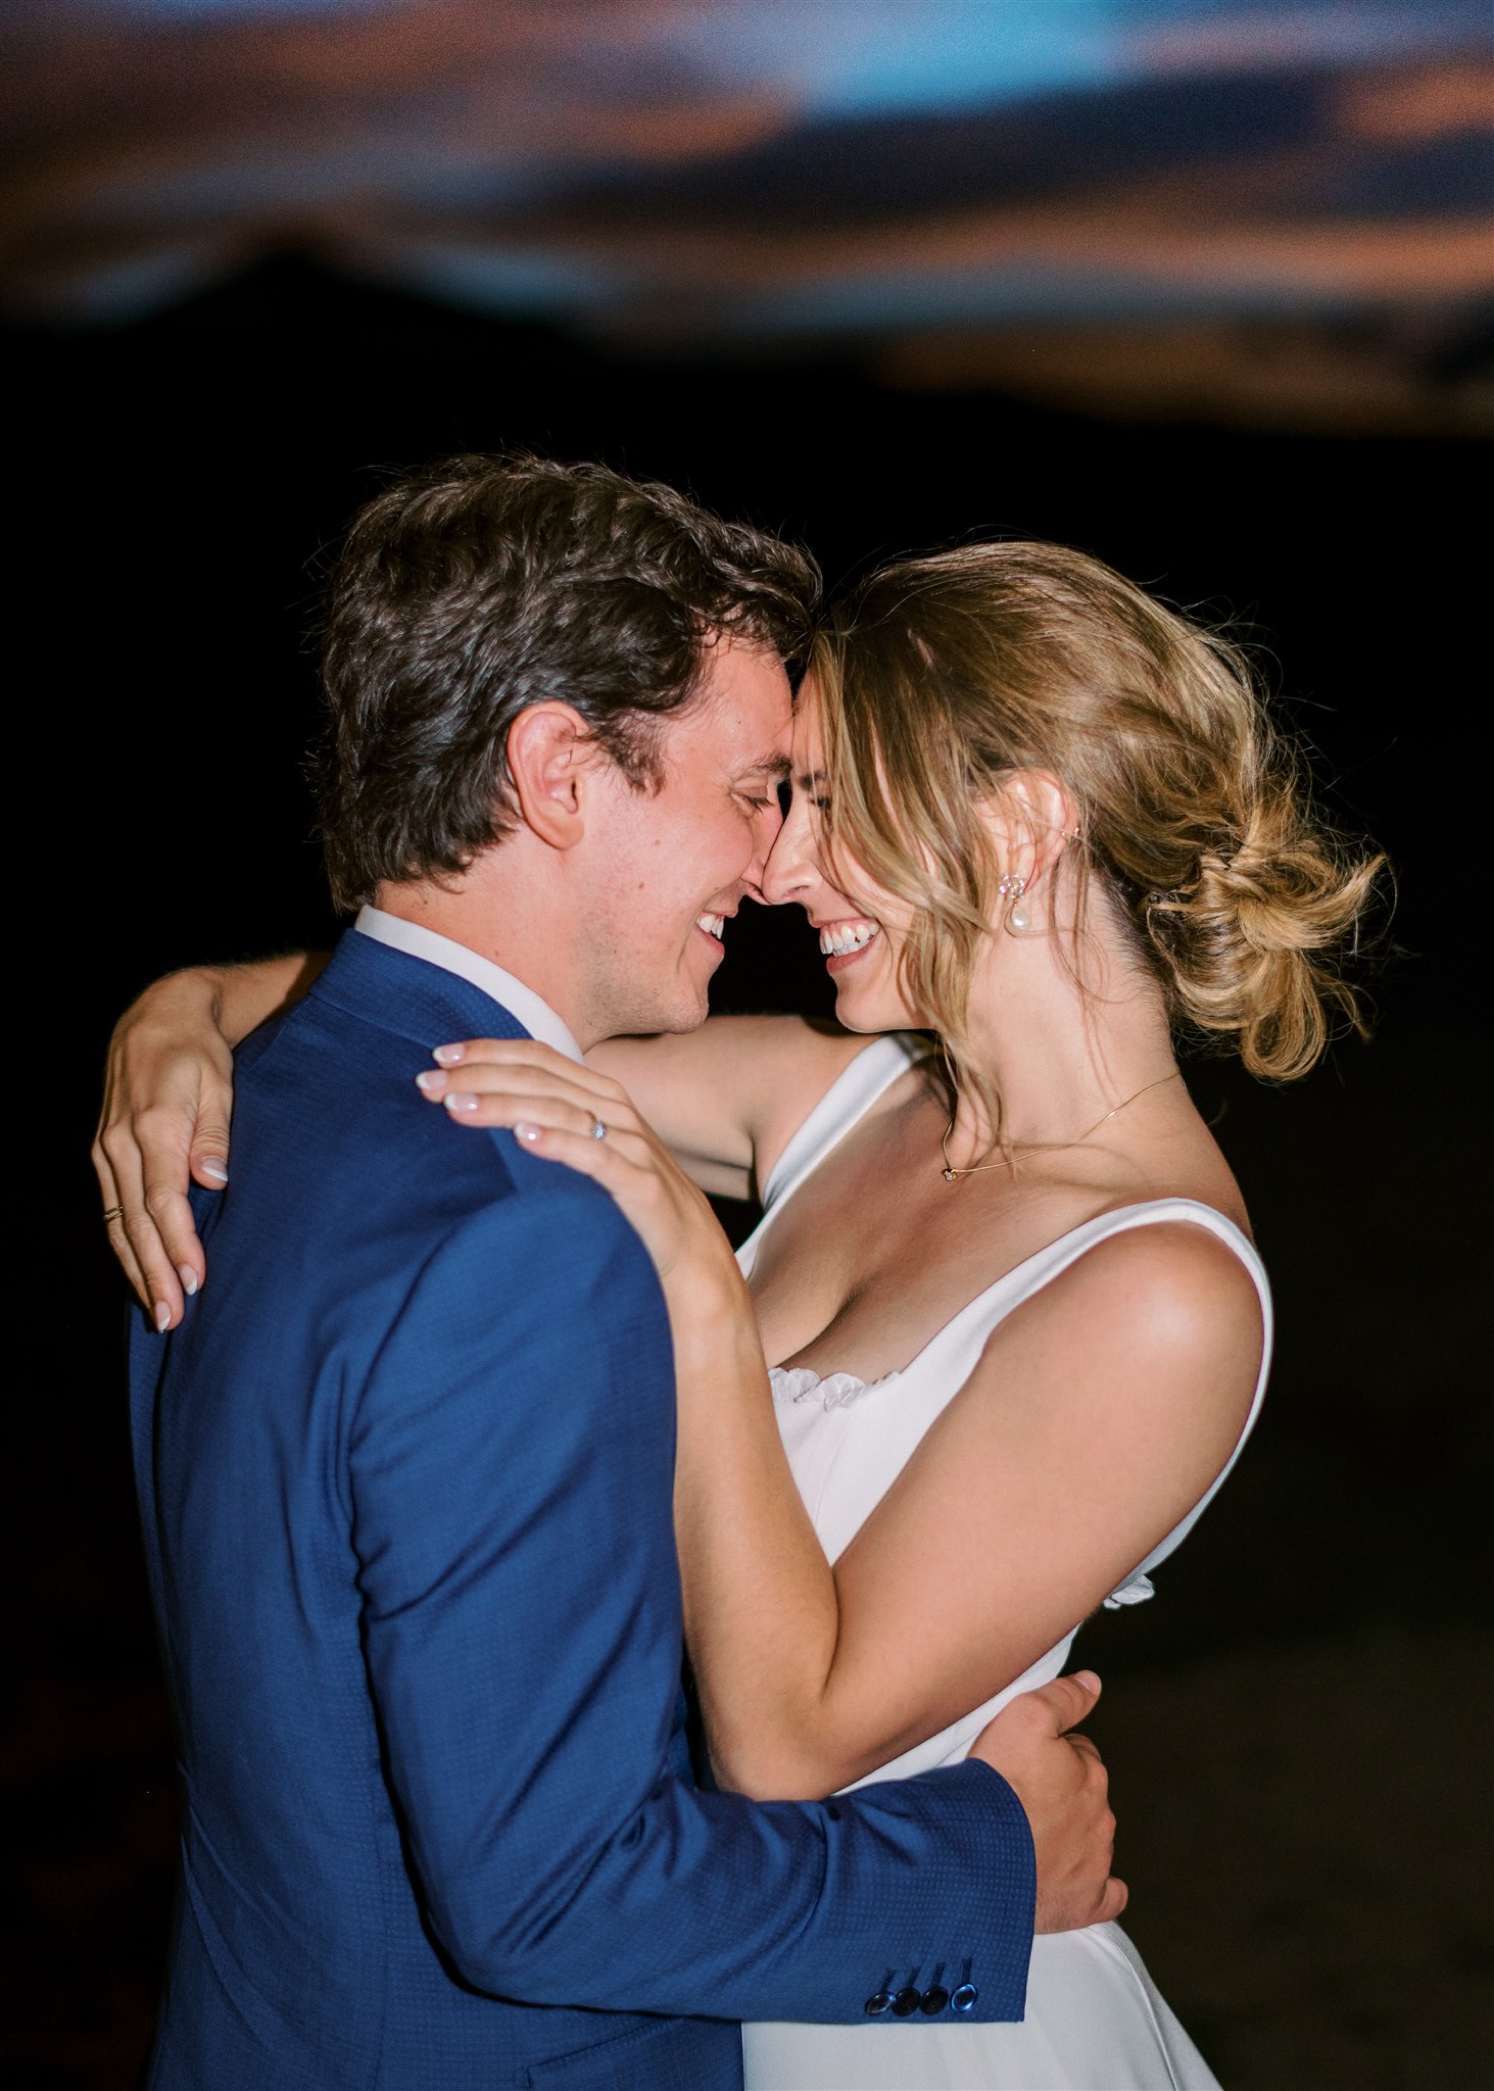 Bride and groom looking at each other at end of night | McArthur Weddings and Events